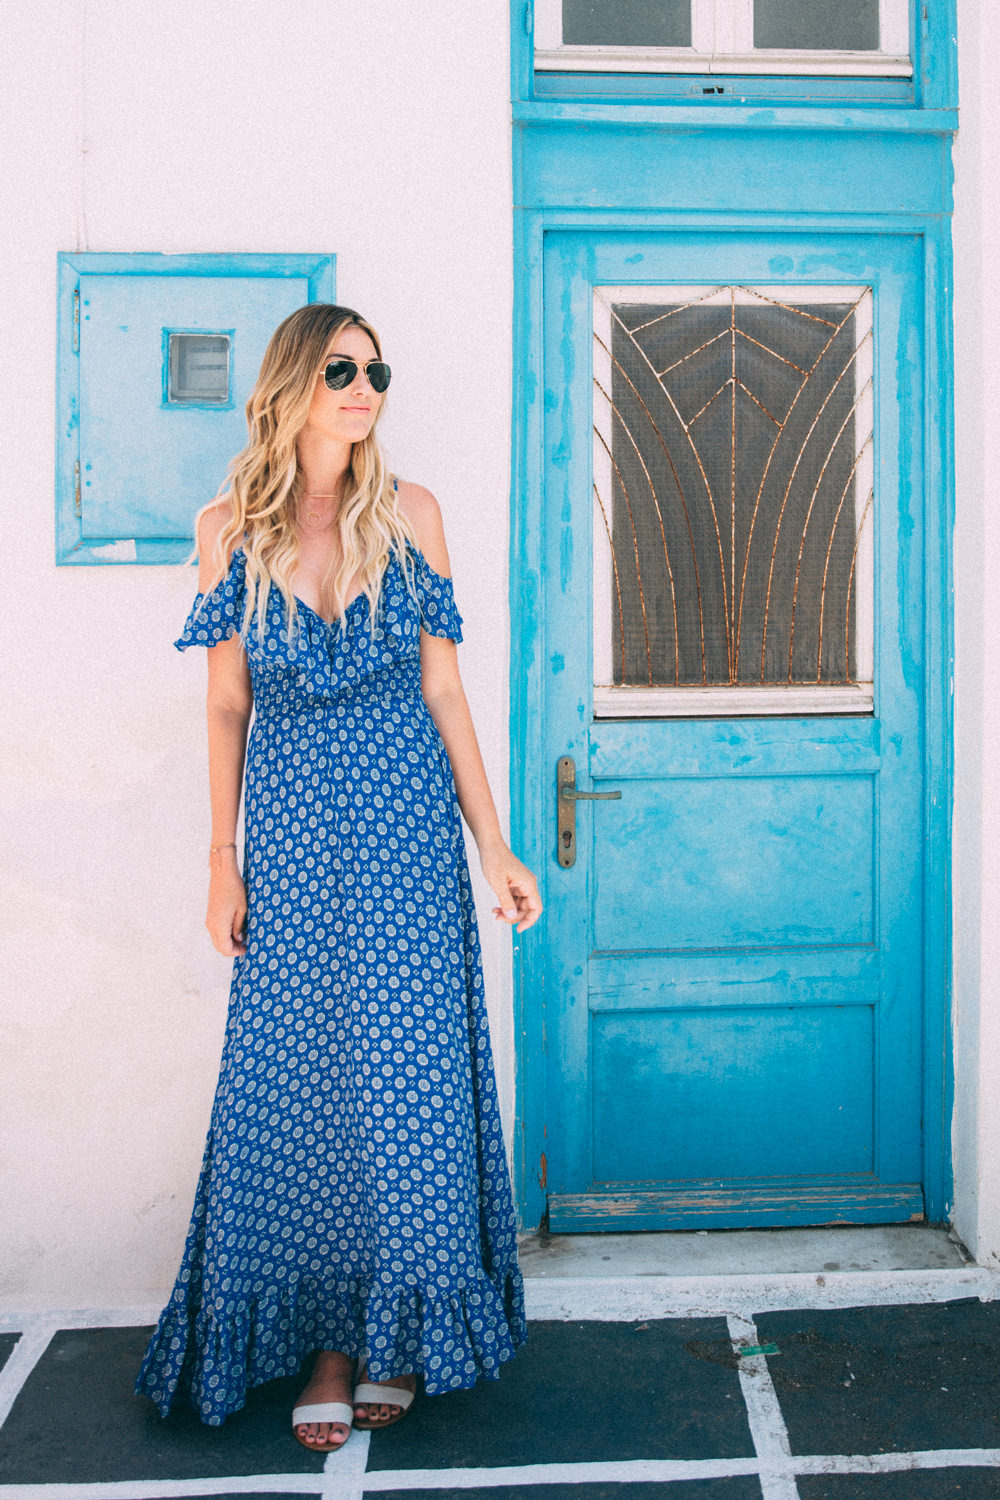 Caitlin Lindquist of the travel blog Dash of Darling shares her adventures in Mykonos, Greece with Royal Caribbean Cruises